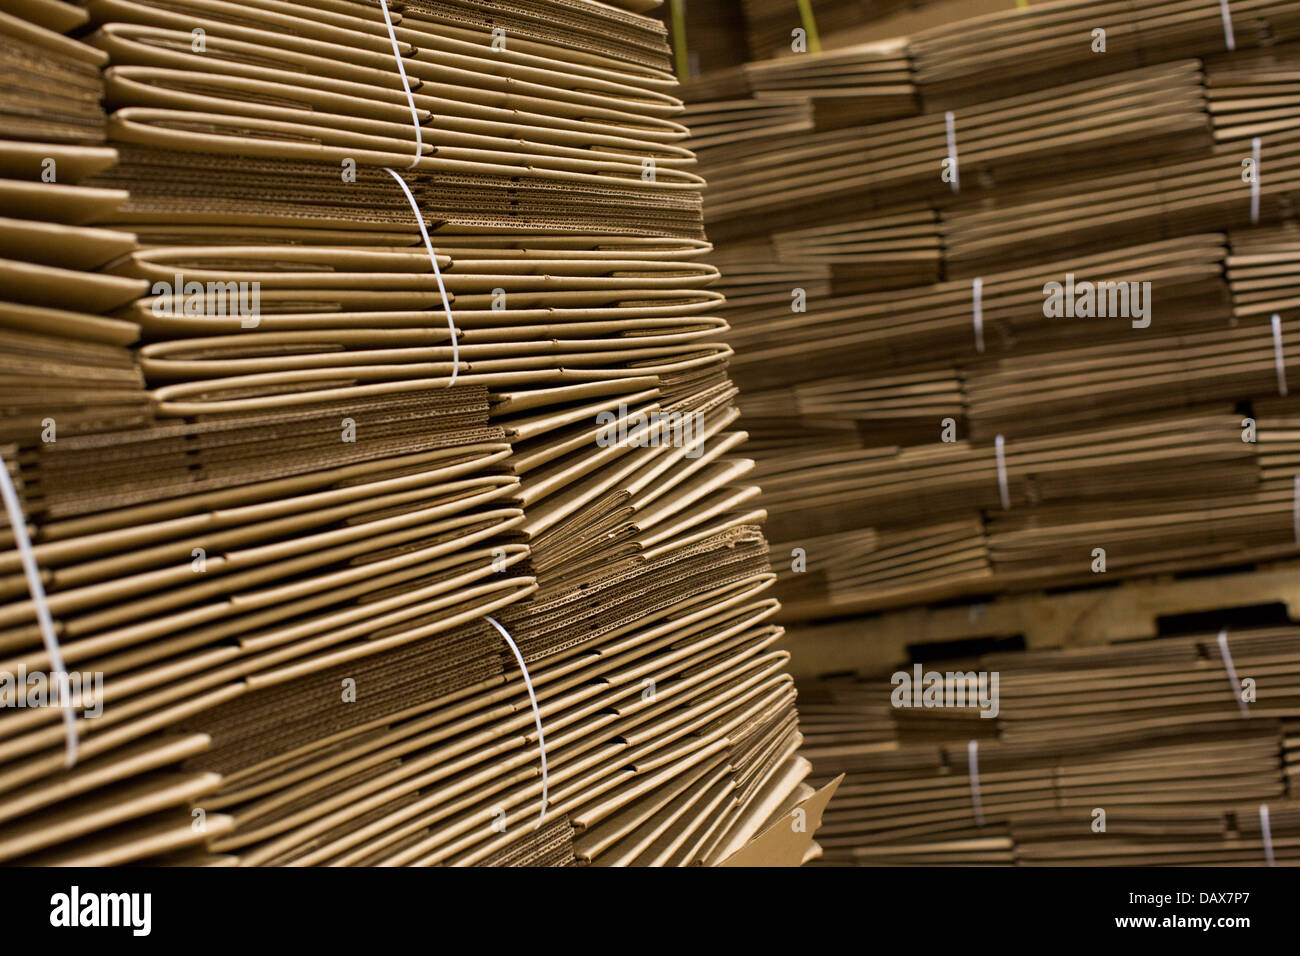 An industrial warehouse full of cardboard boxes on shelving.  Stock Photo